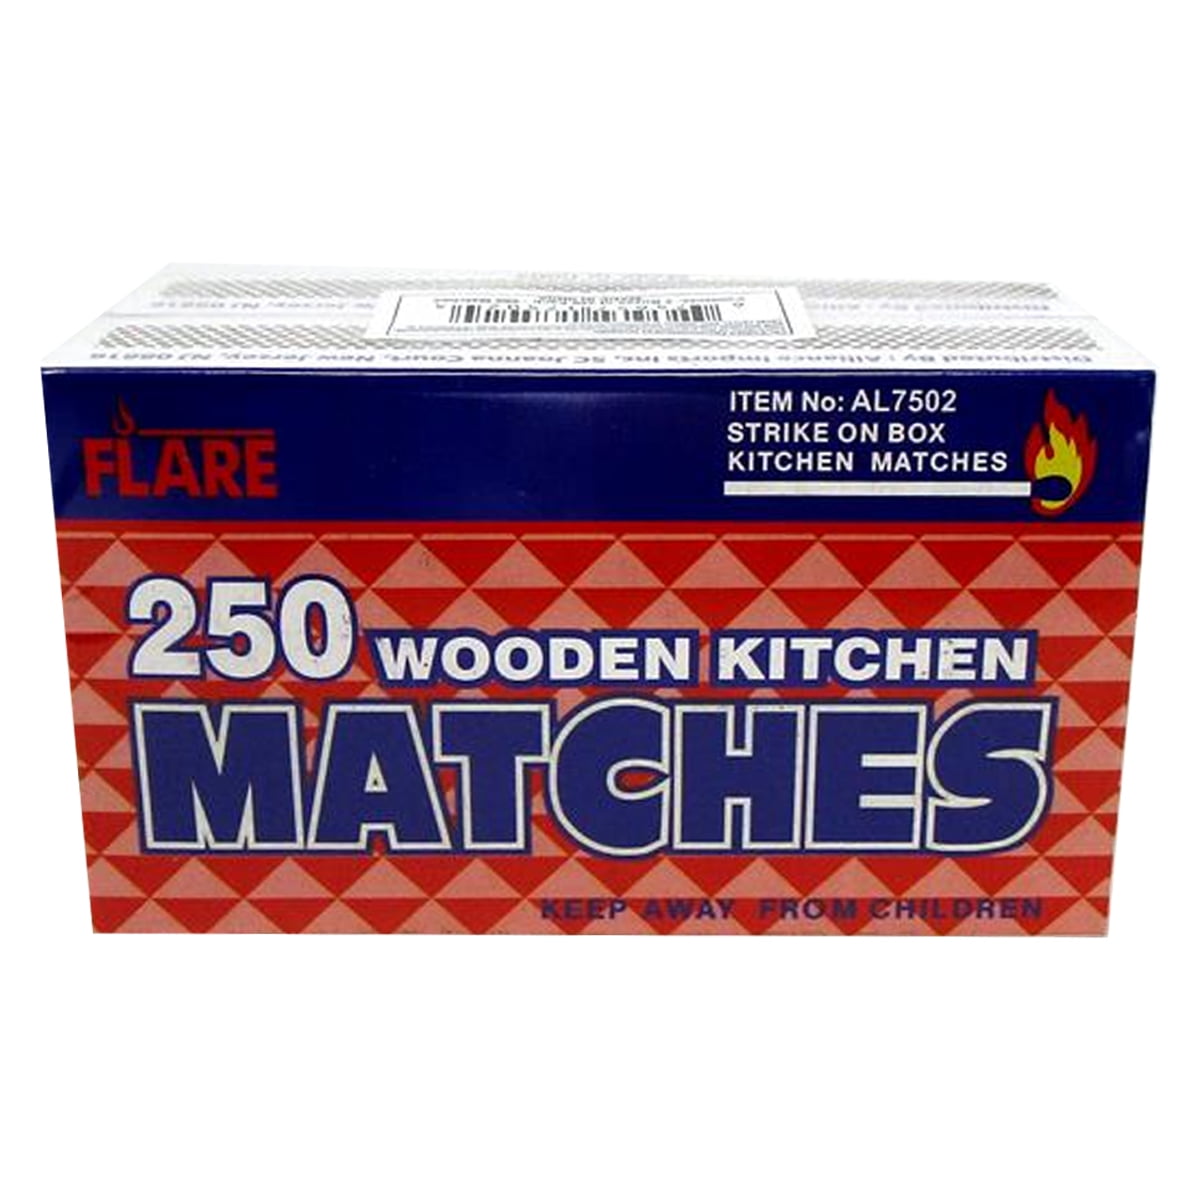 Goodco Kitchen Matches Strike on Box 250 Count Pack of 2 